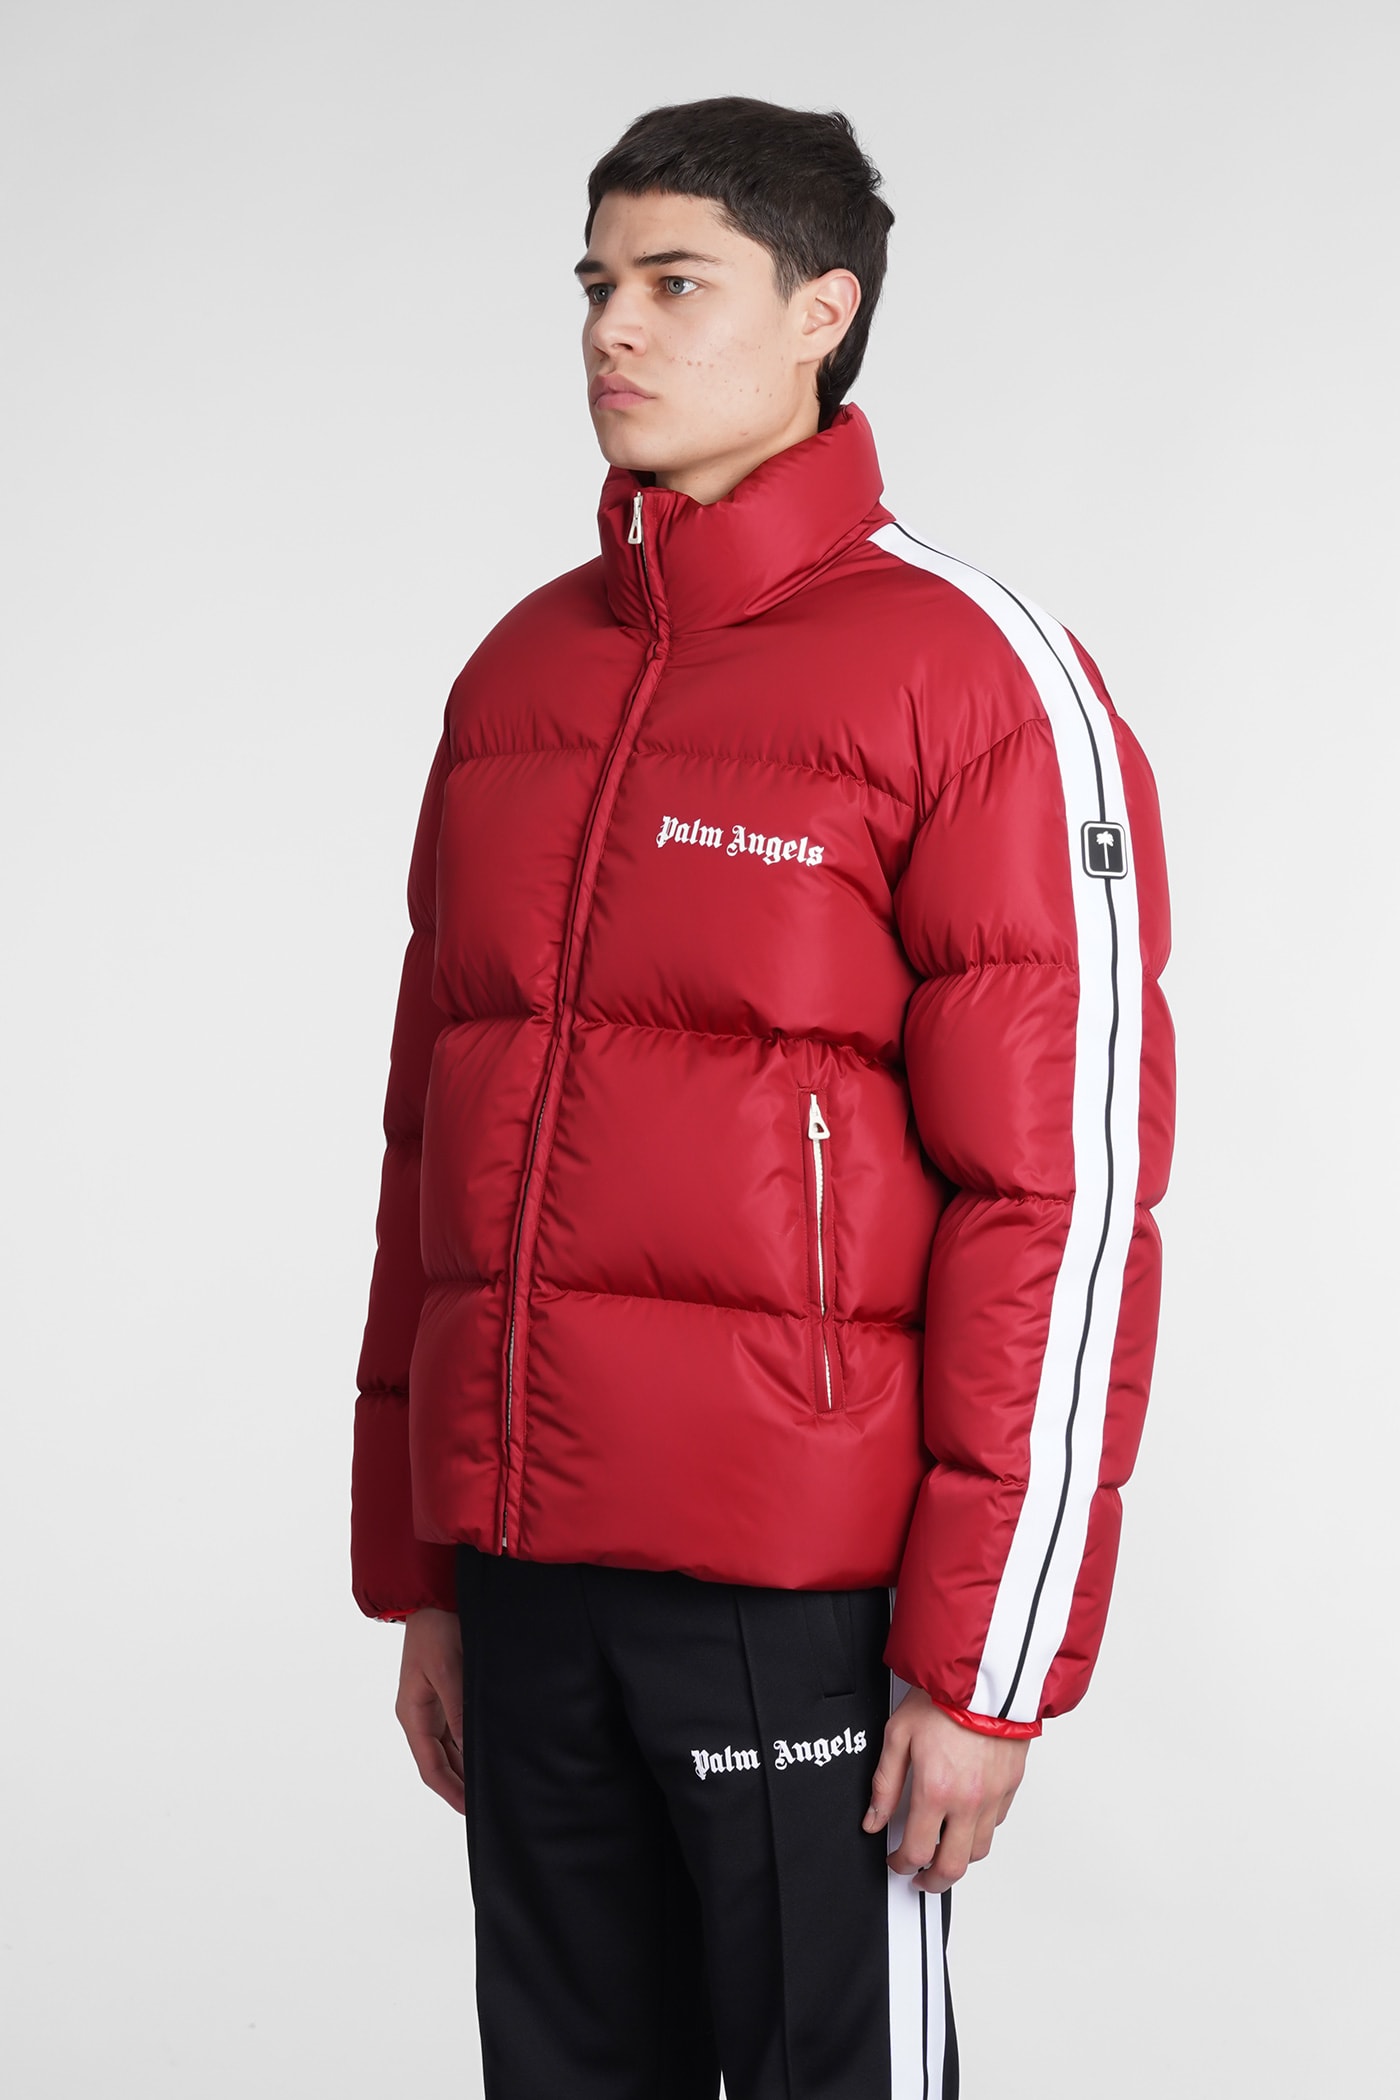 Jacquard Damier Classic Track Jacket Black and Red